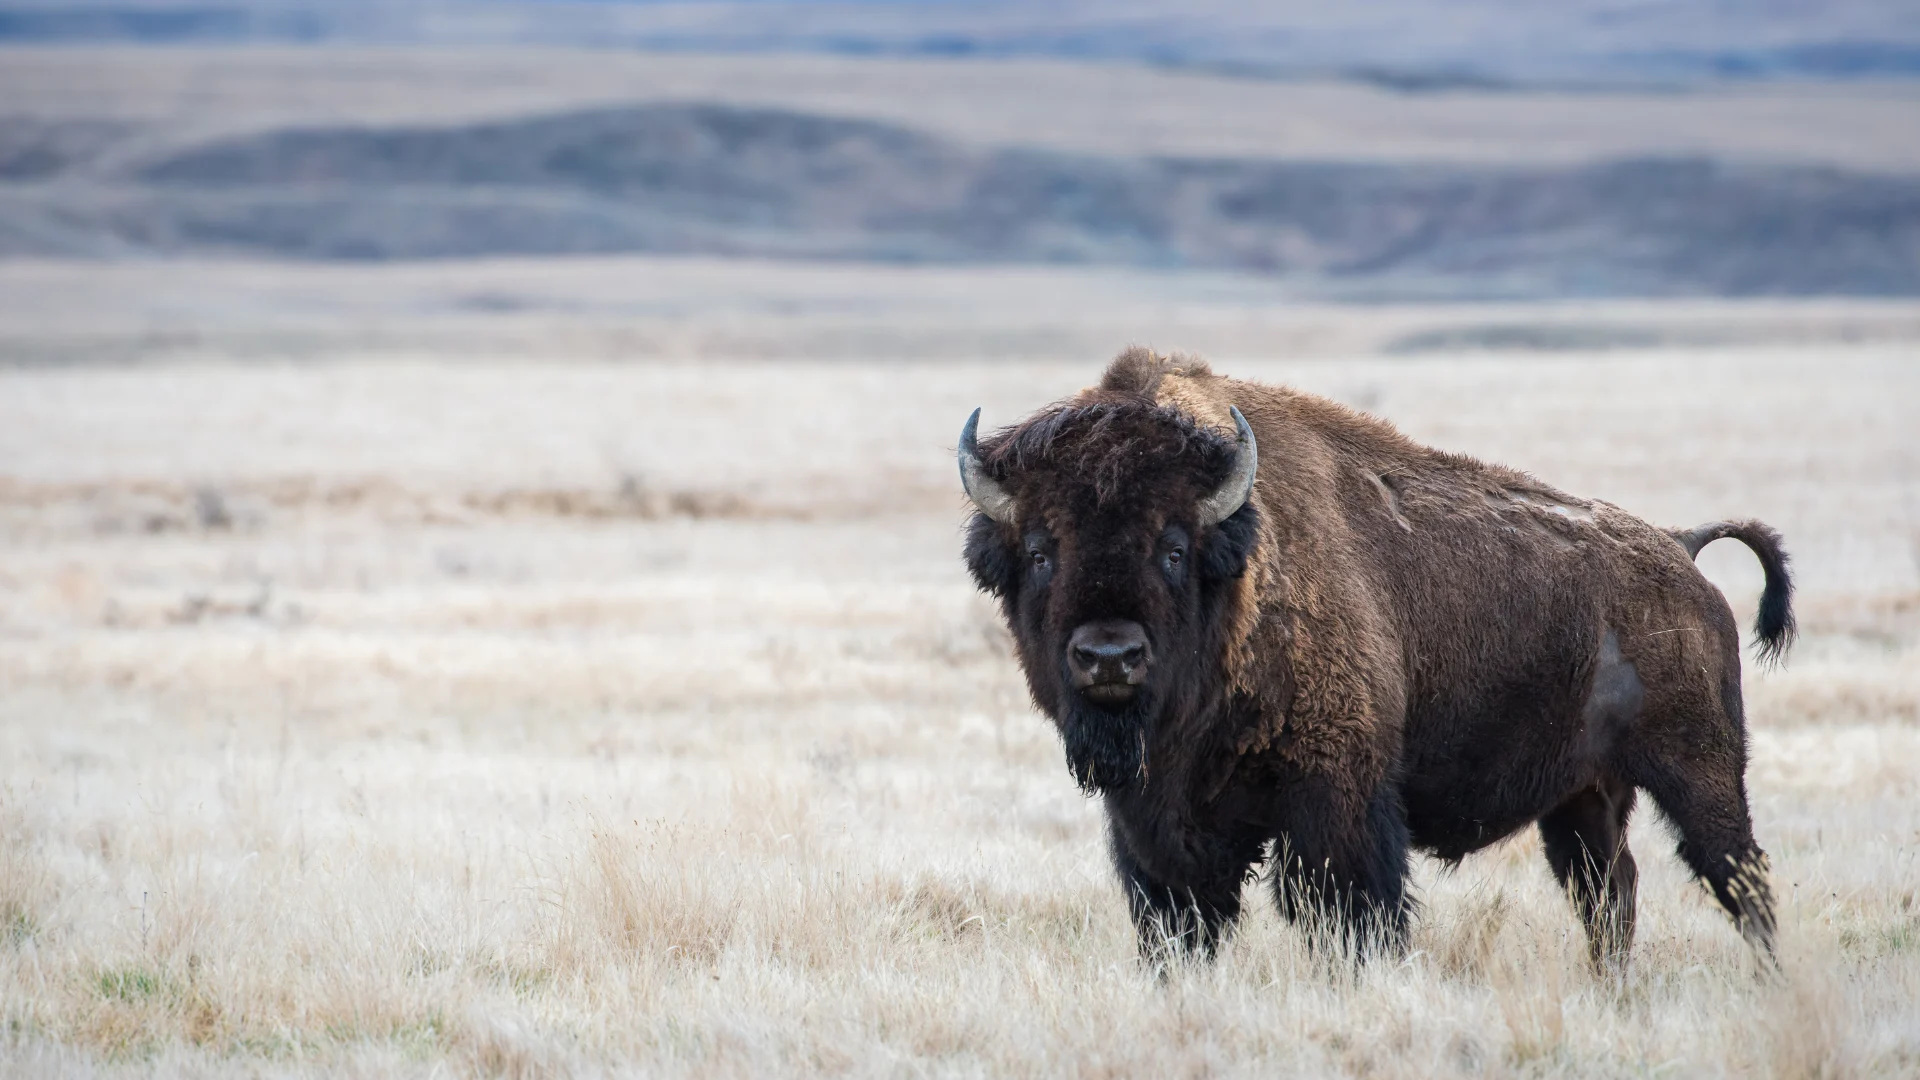 'Respect their space': 83-year-old woman seriously injured by bison